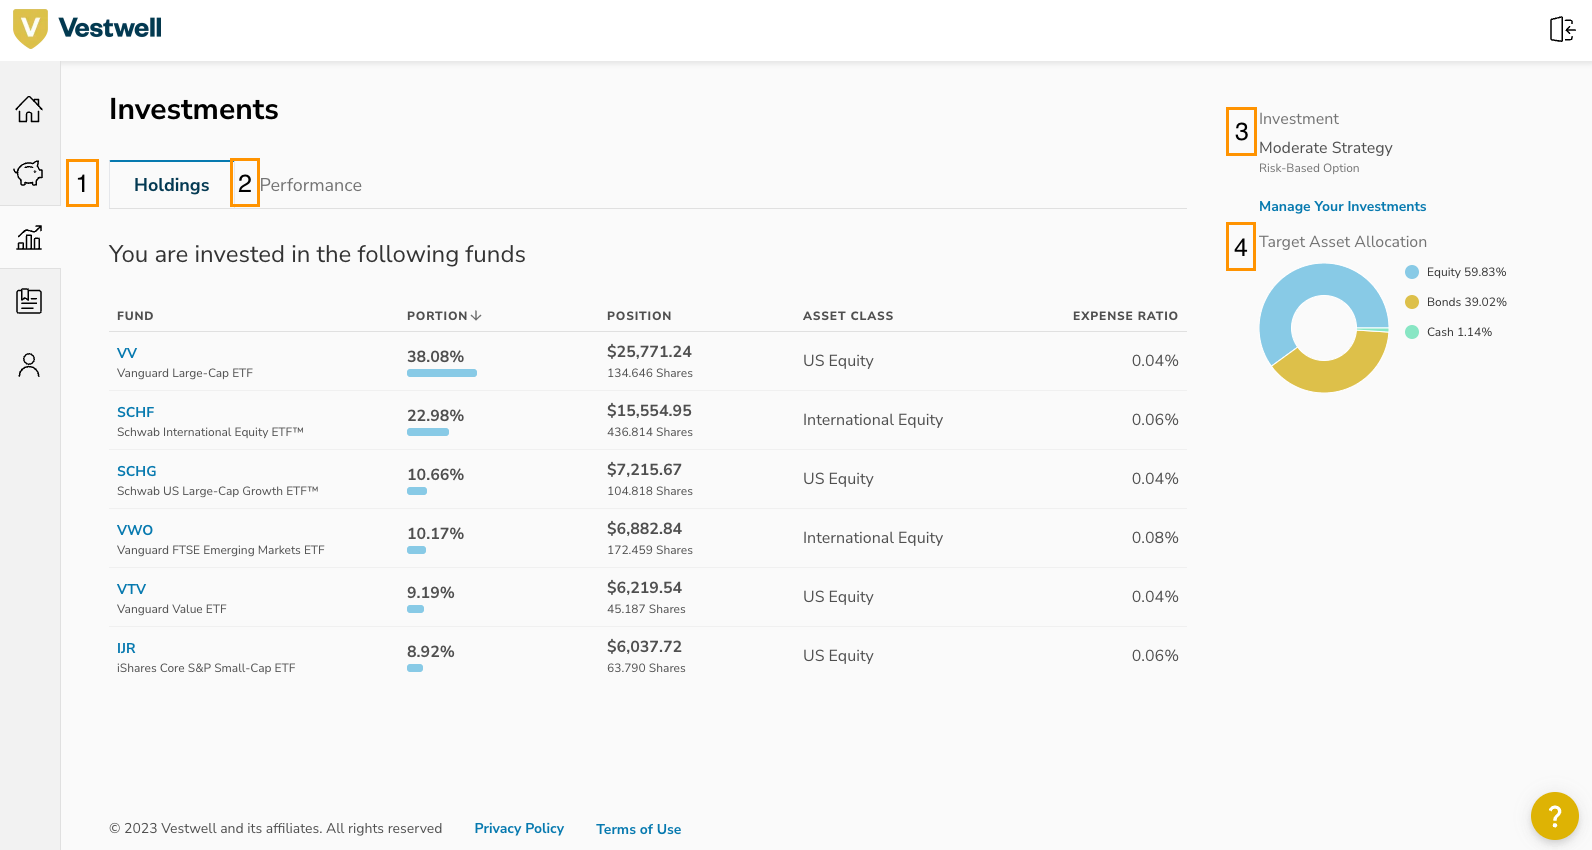  This is a screenshot of the breakdown of the investments page